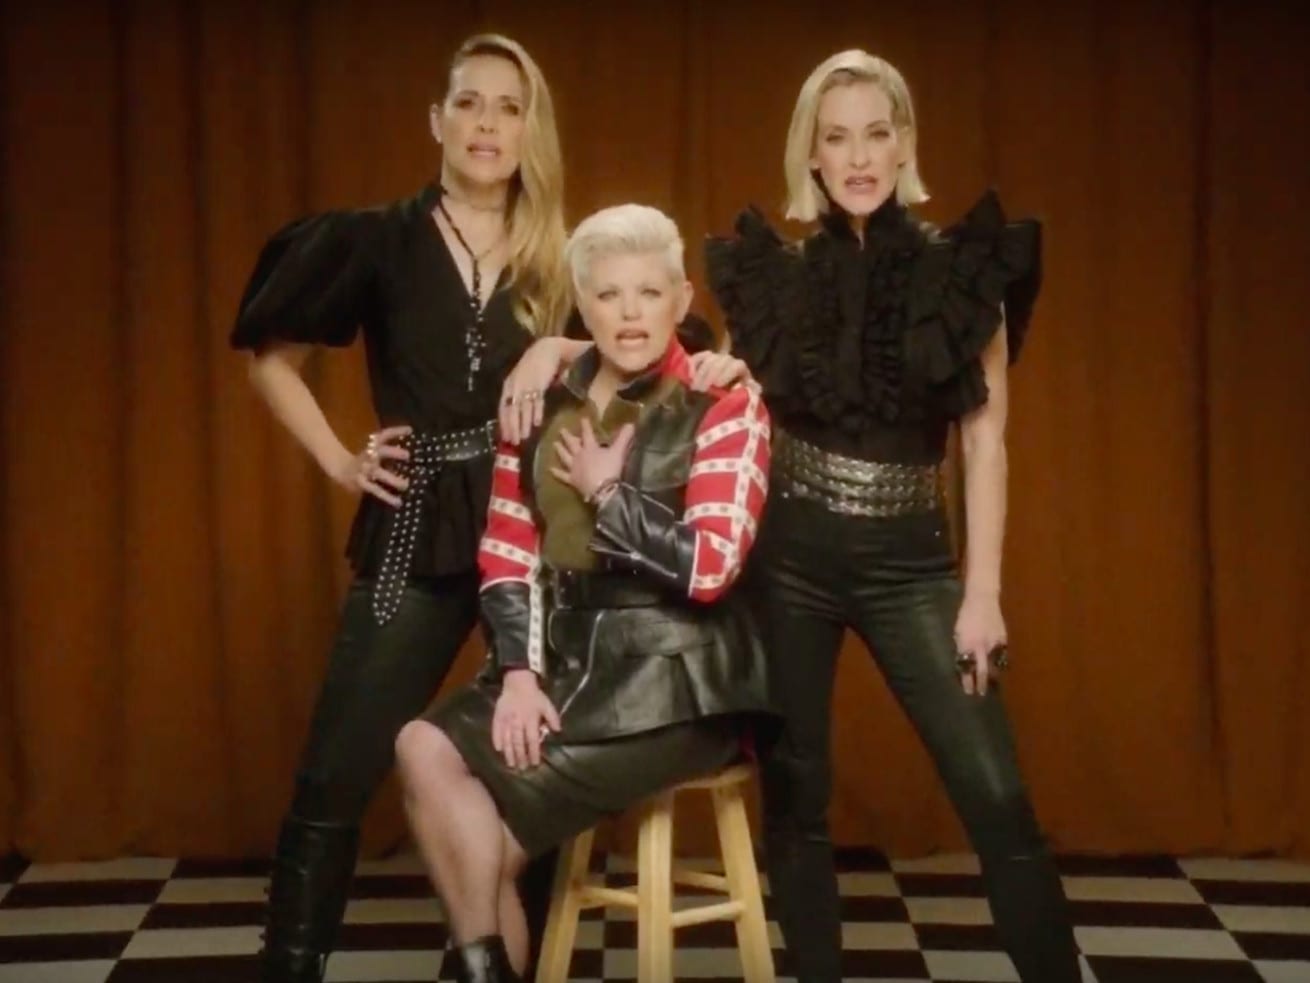 The Dixie Chicks make their triumphant return with the kiss-off anthem “Gaslighter”